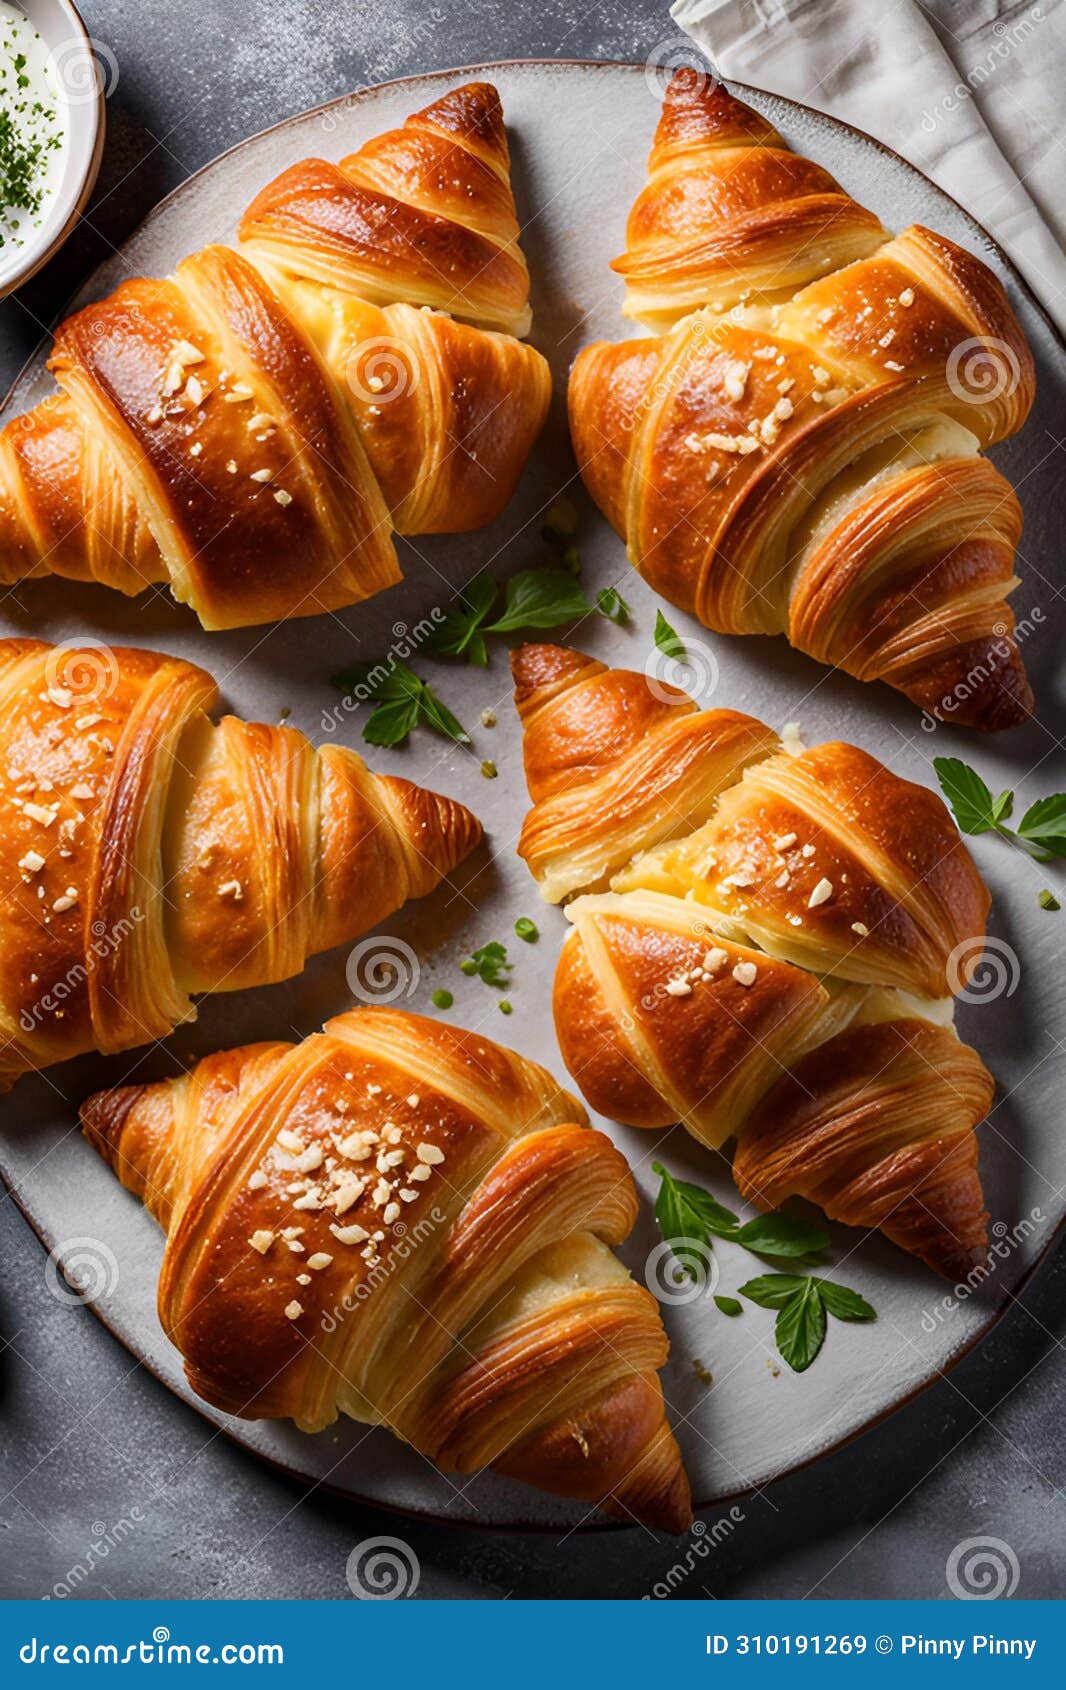 a food snapshots with croissants, delicious, crispy, cheese fillings, baked, bakery, cake, bread